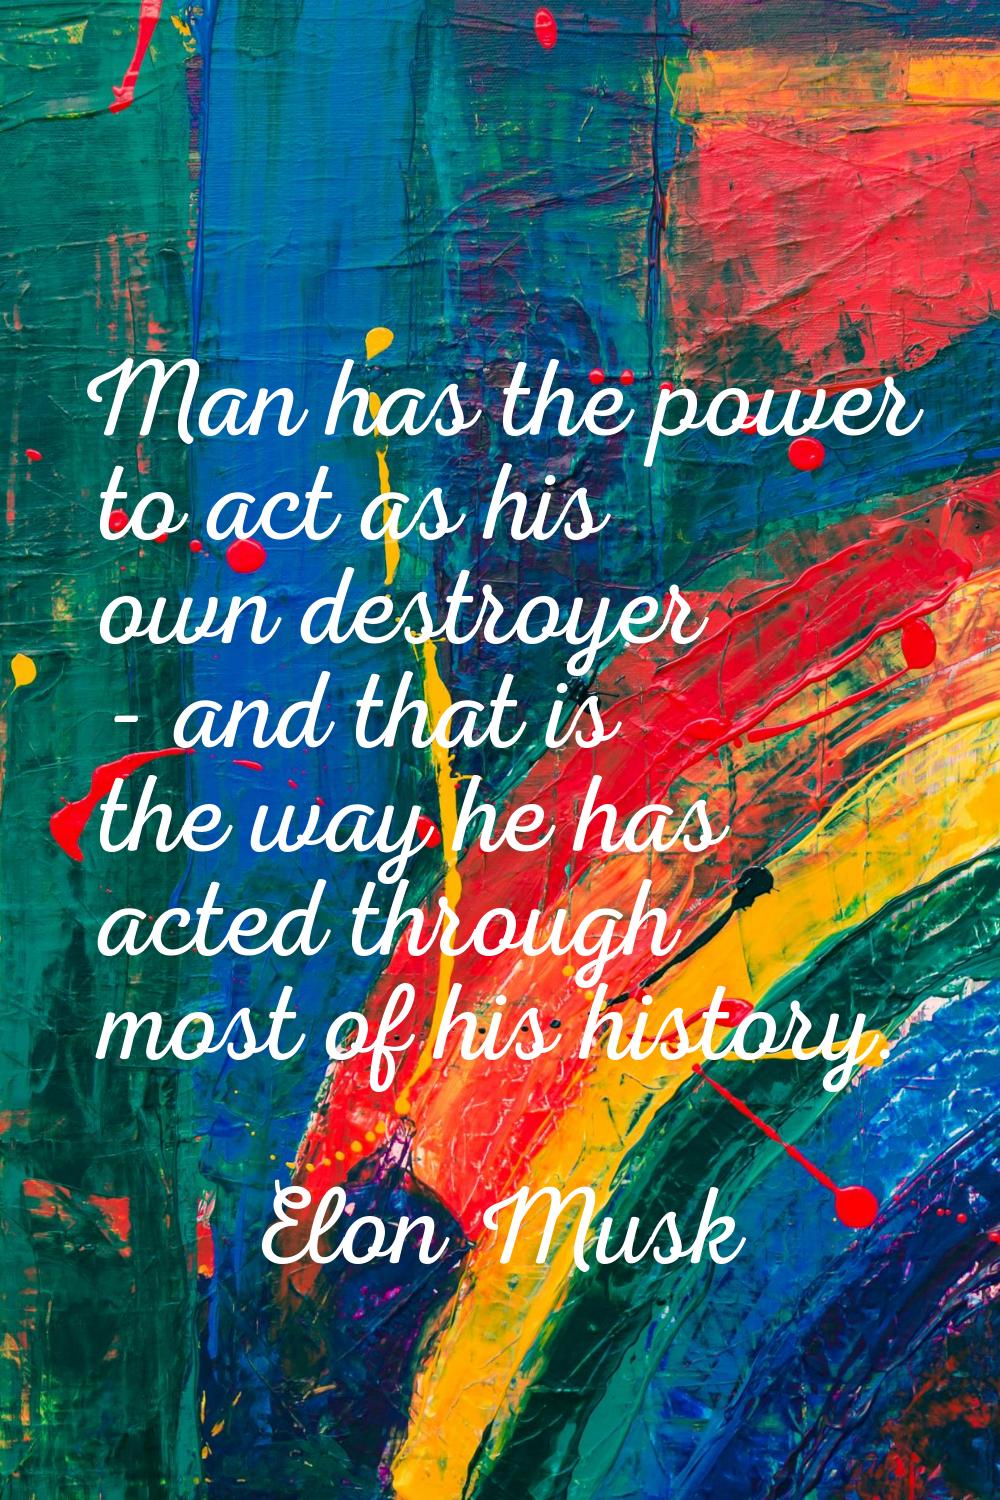 Man has the power to act as his own destroyer - and that is the way he has acted through most of hi